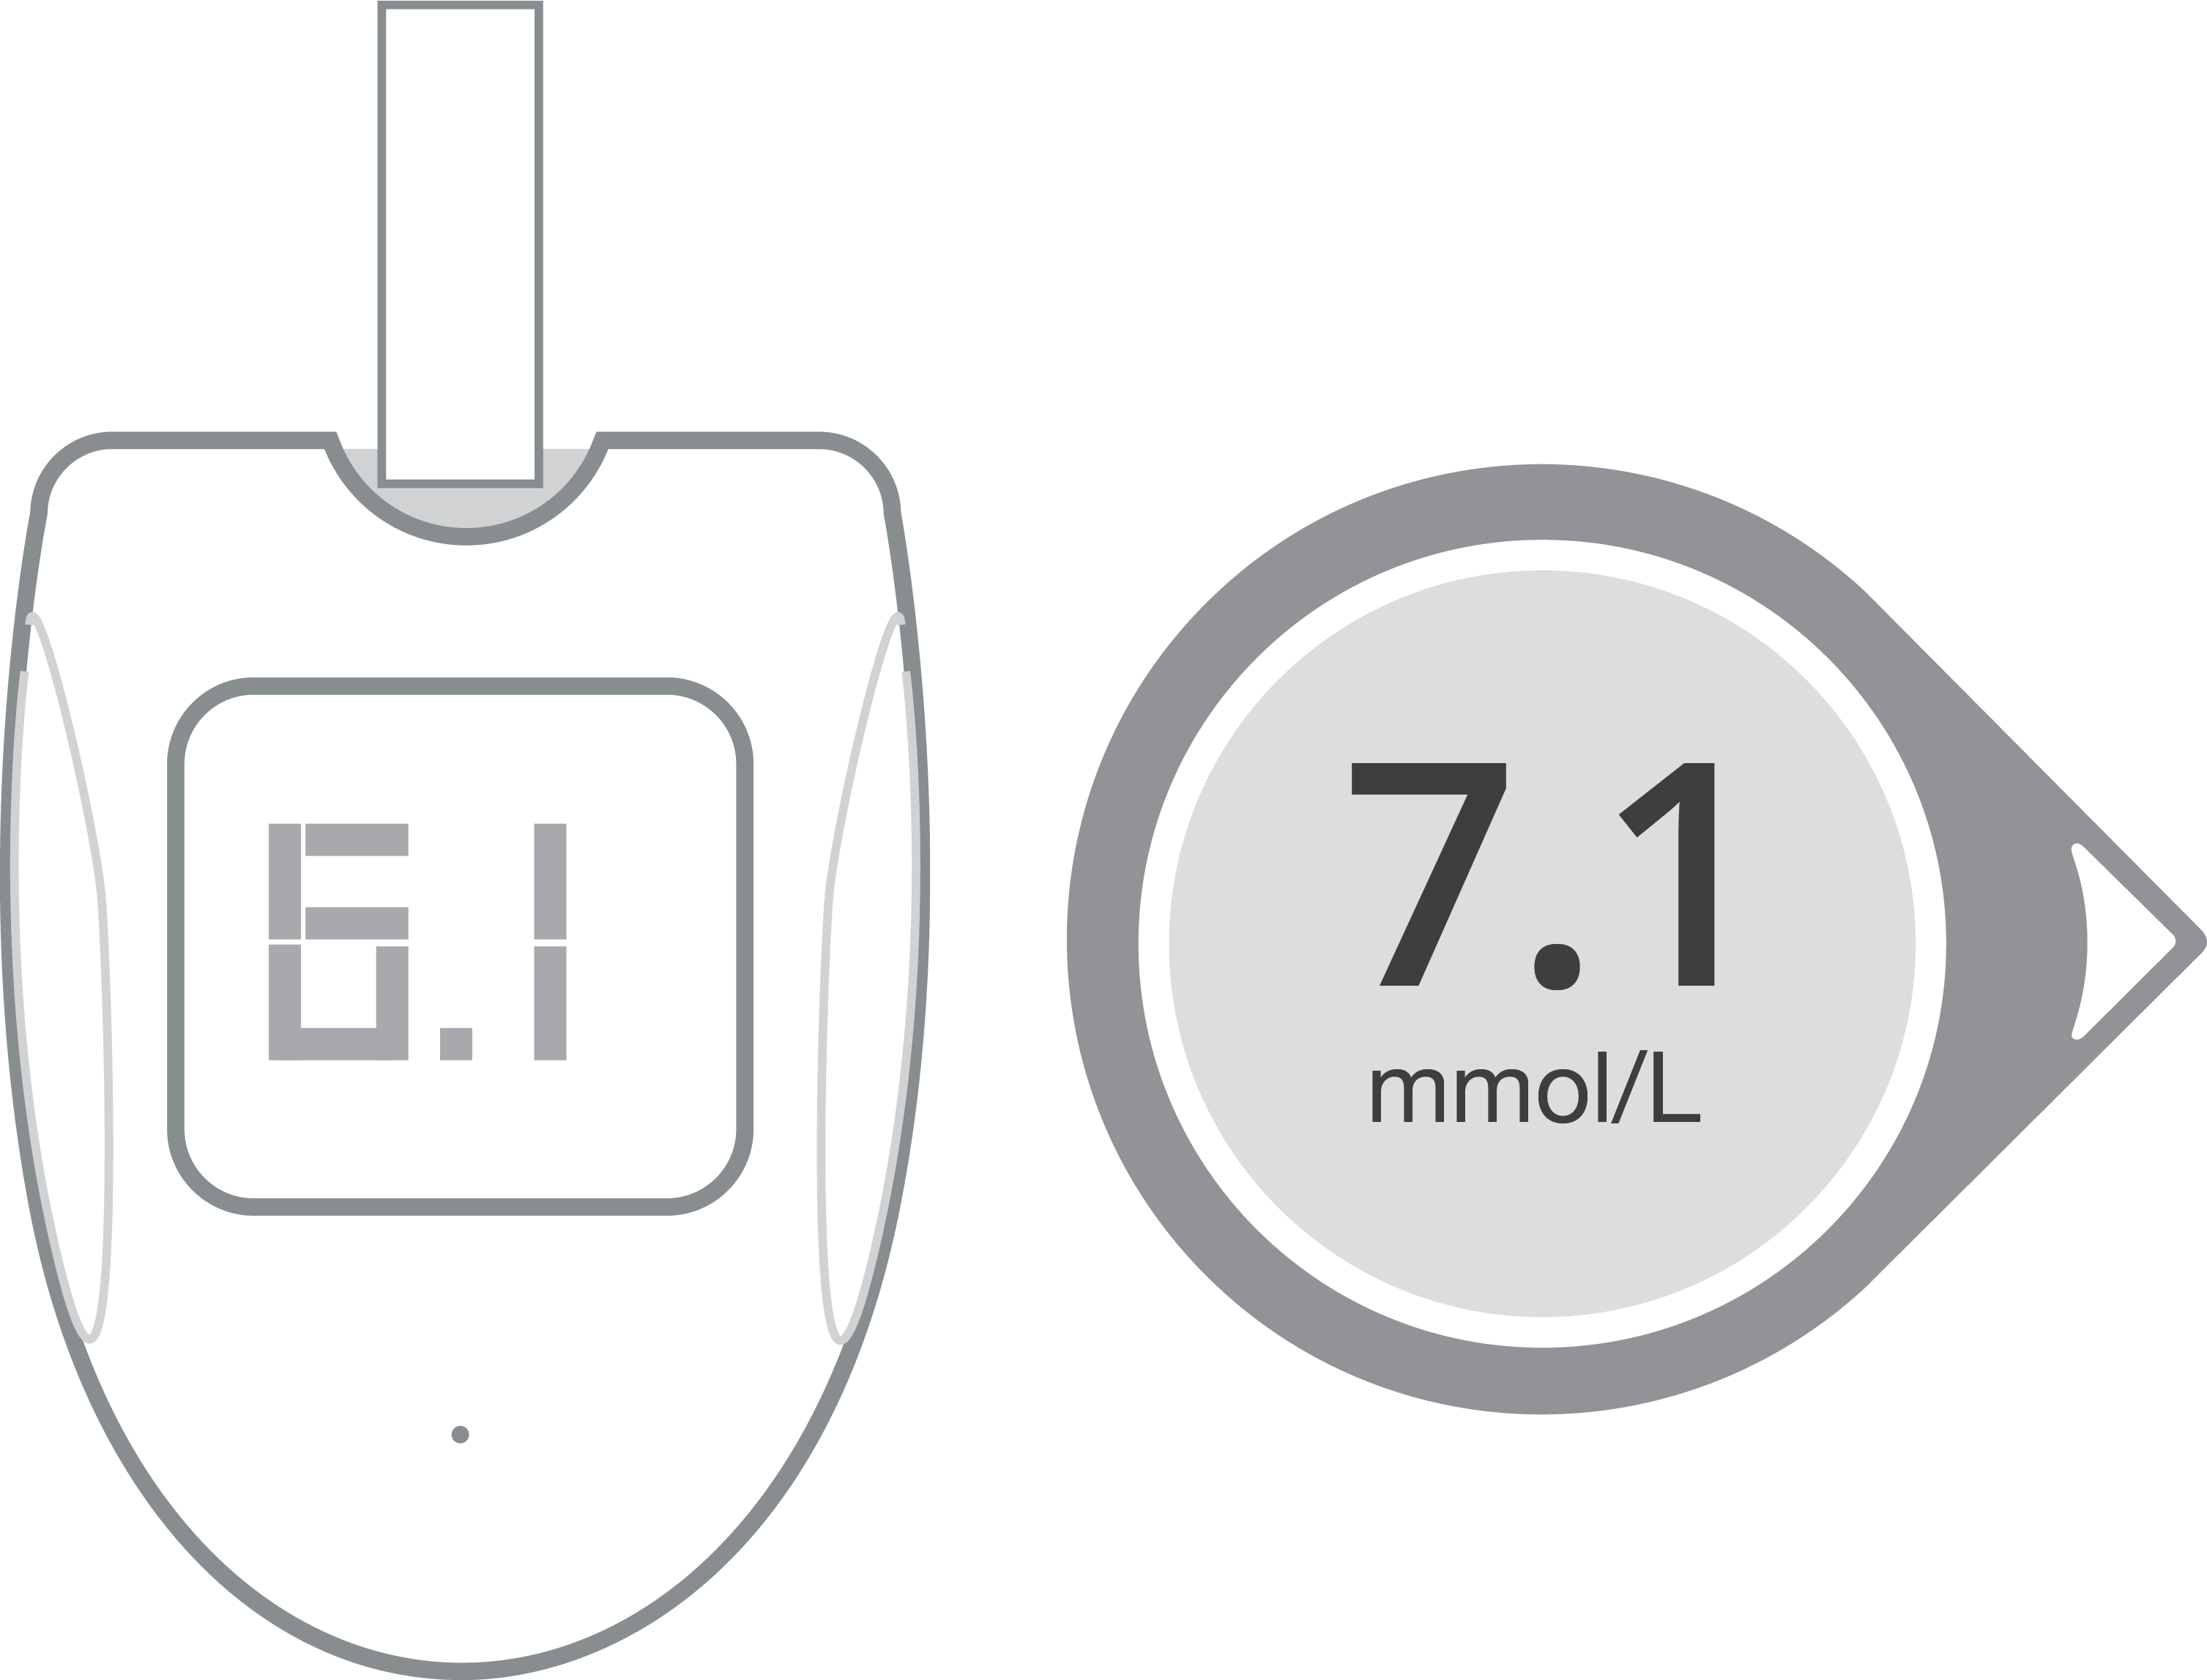 Illustrated blood glucose meter and Dexcom Arrow